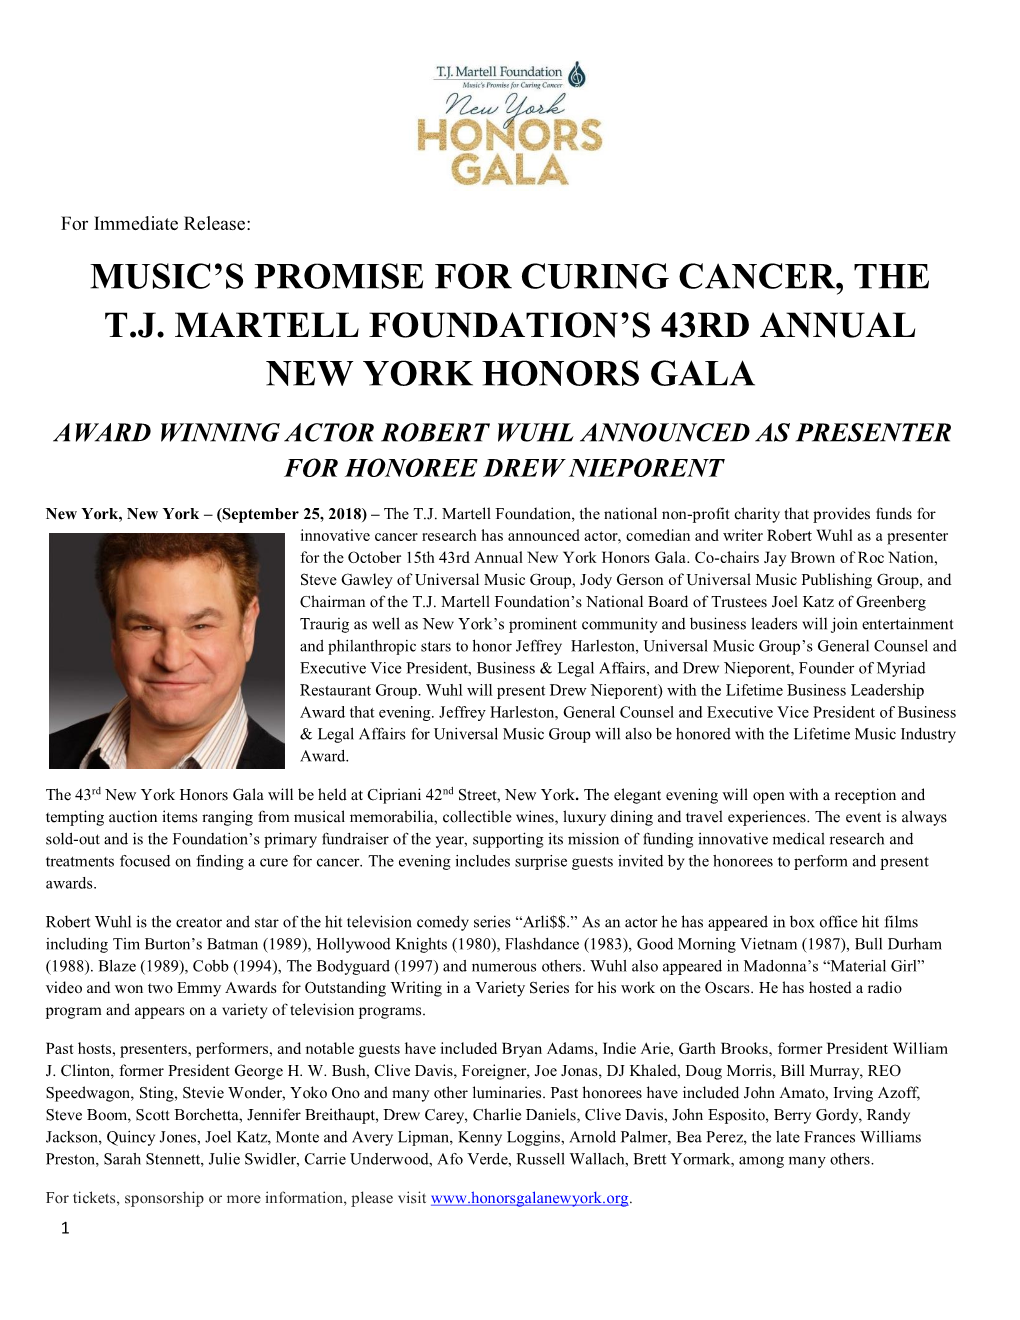 Music's Promise for Curing Cancer, the Tj Martell Foundation's 43Rd Annual